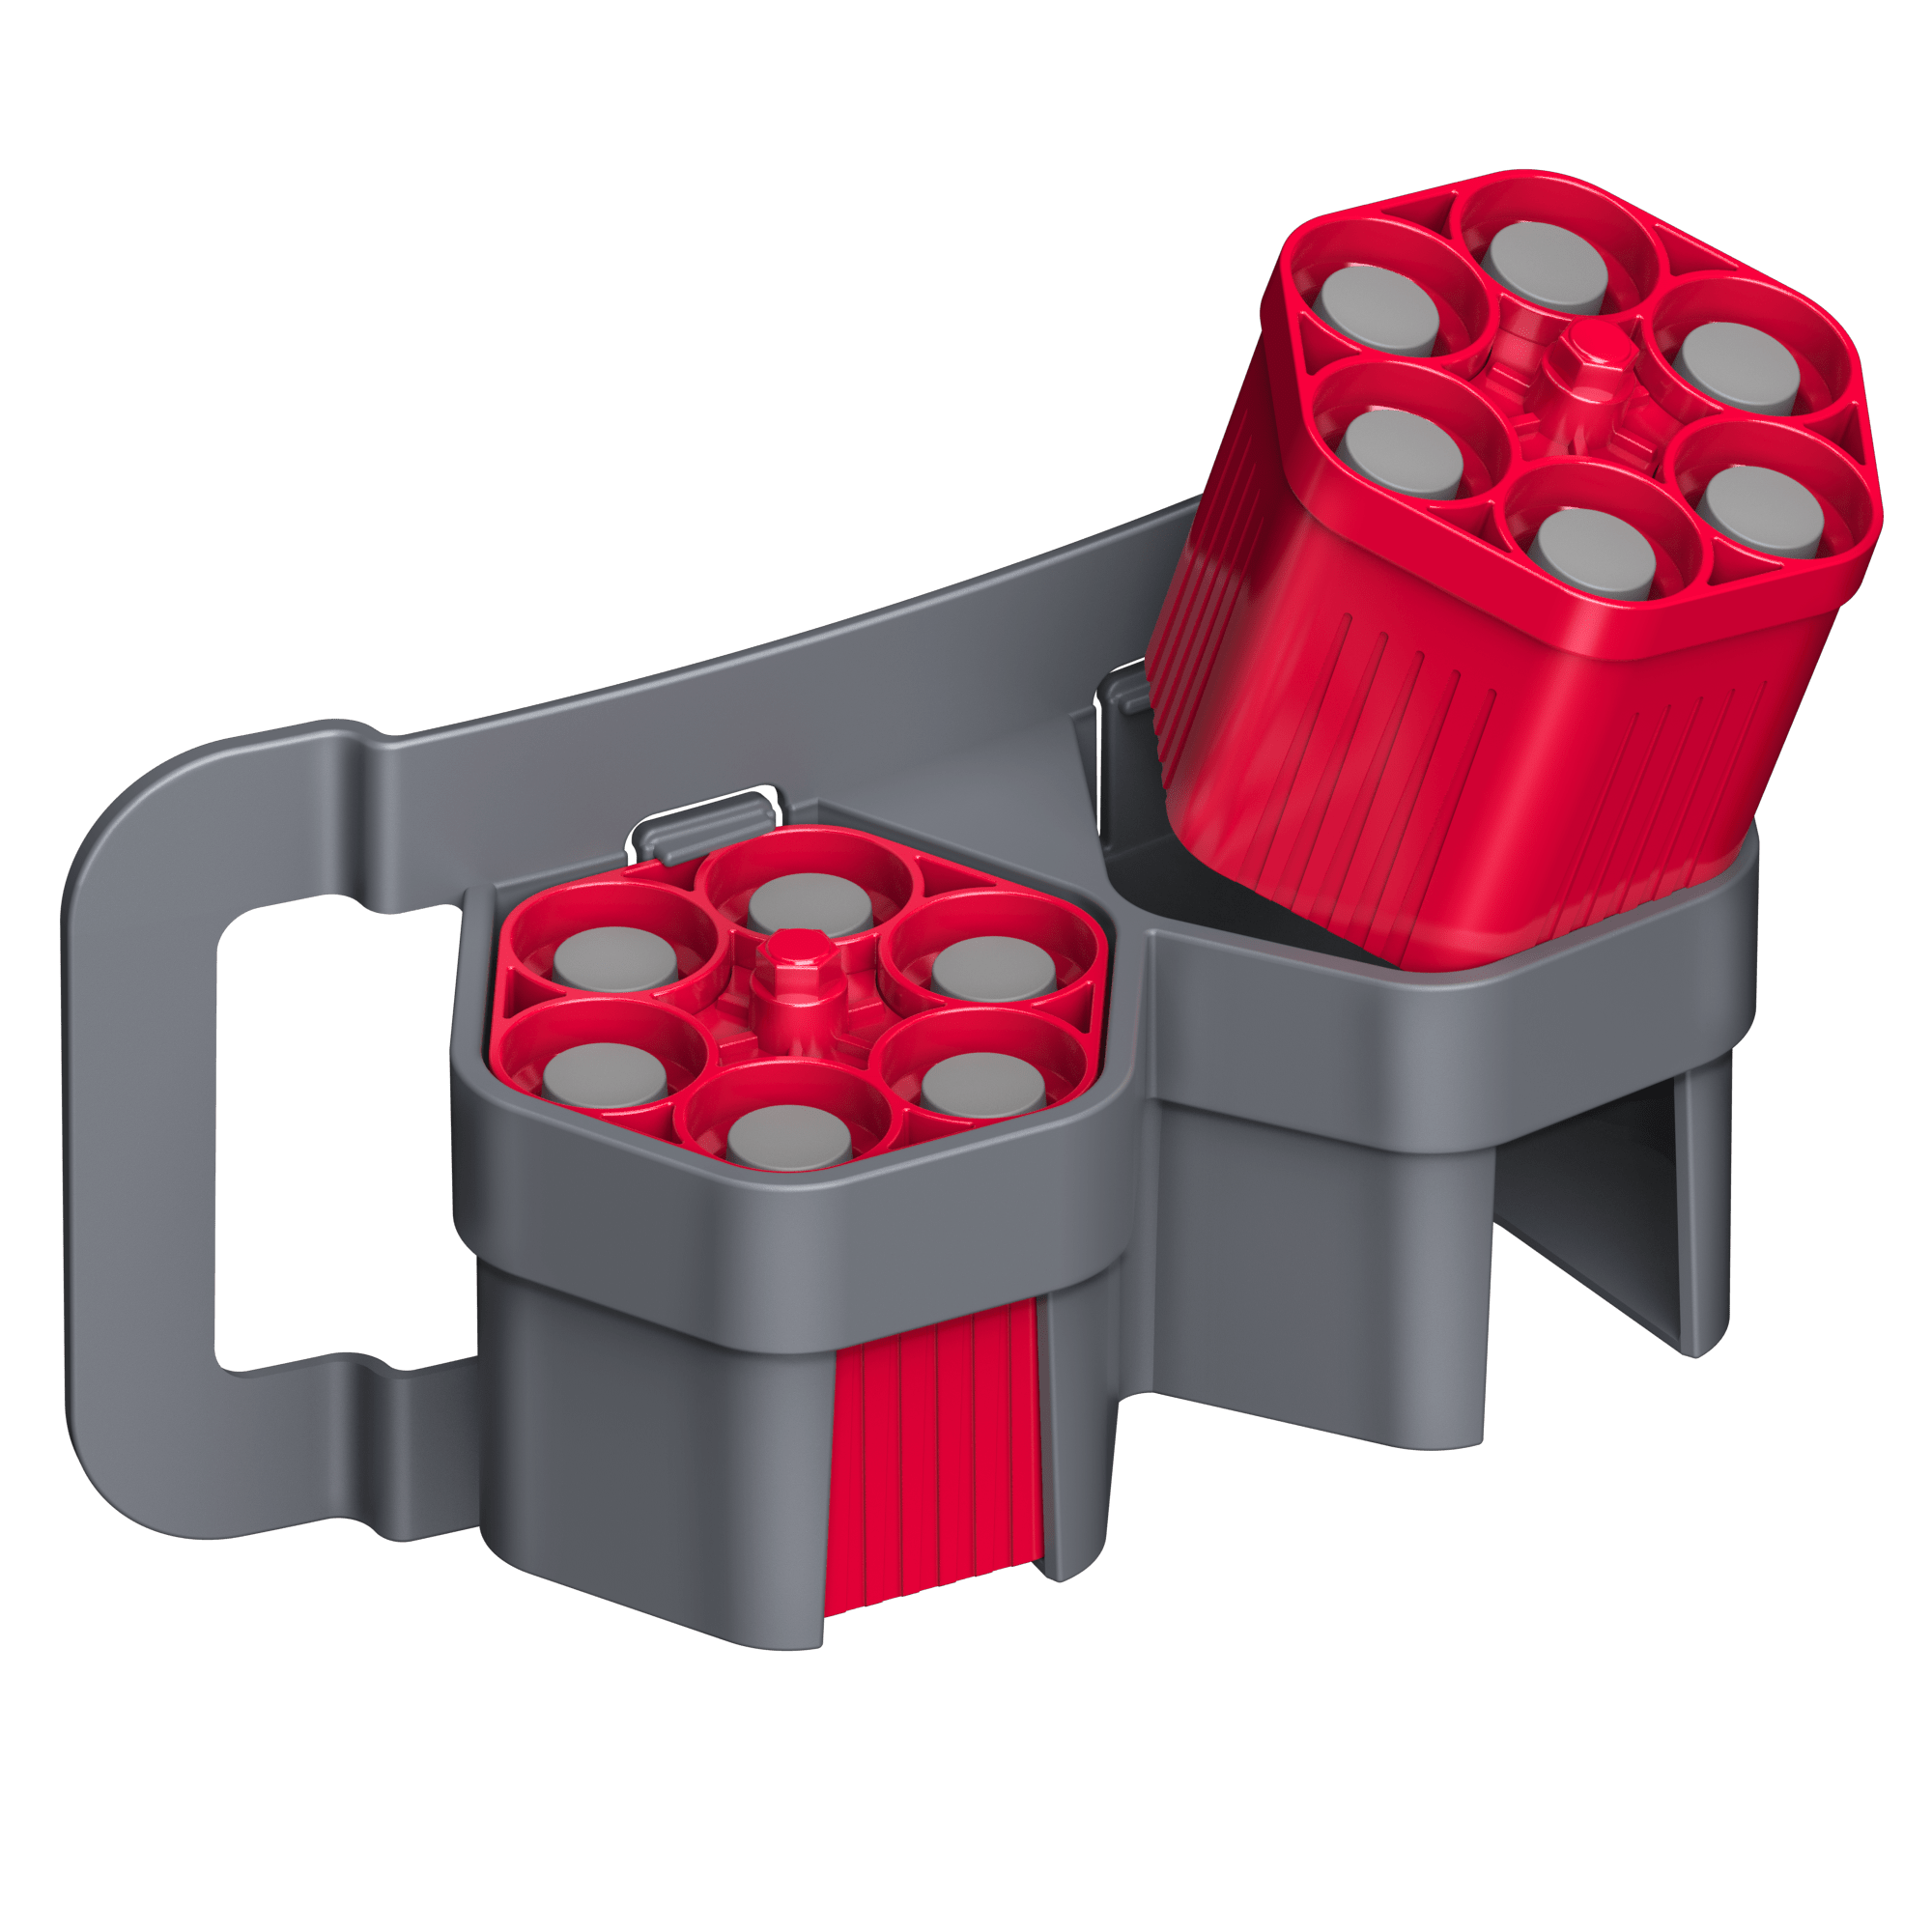 FREE 3D Files: Outlaw Cylinder Holster